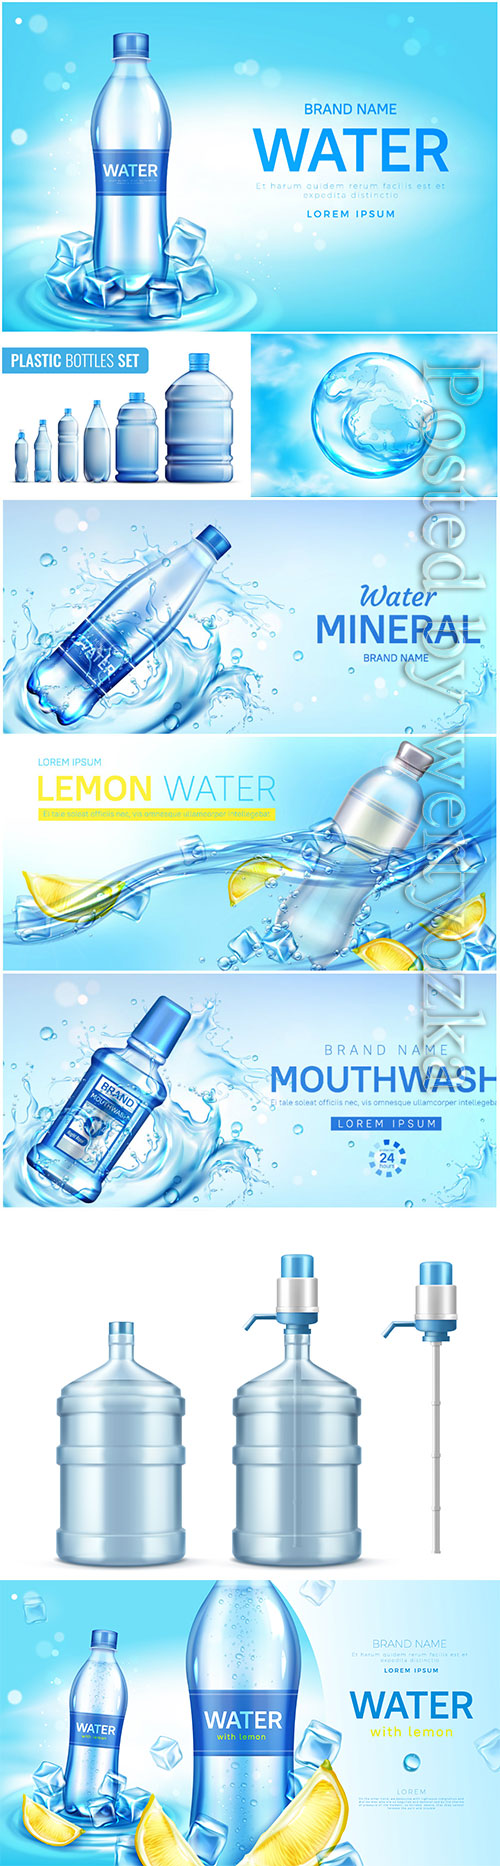 Water bottle ad banner, flask with drink, splashing water drops in vector # 3